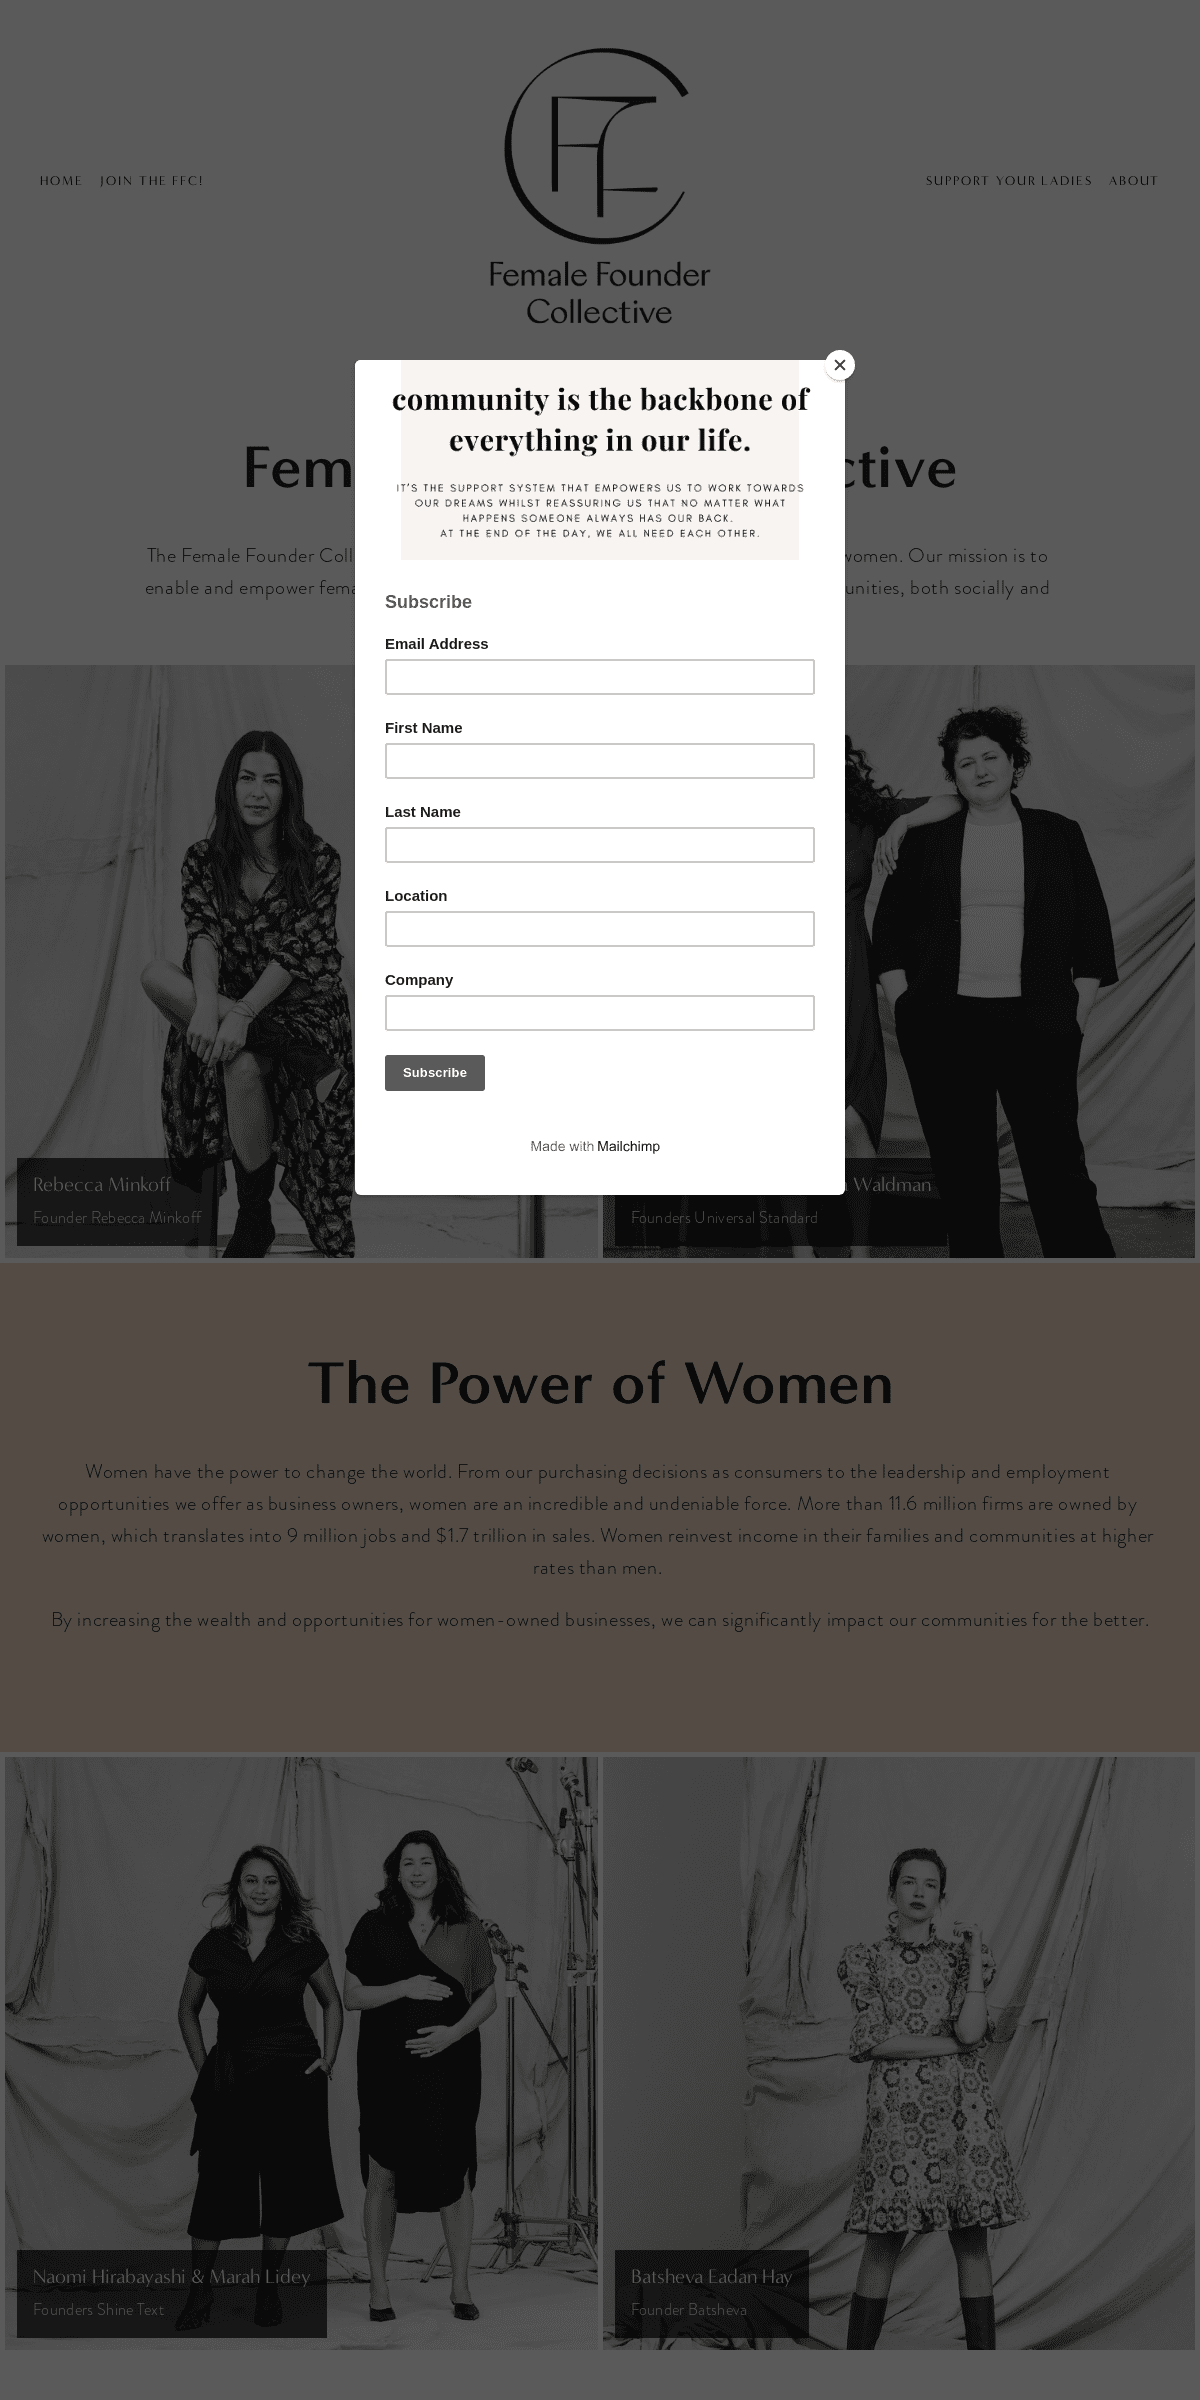 A complete backup of femalefoundercollective.com